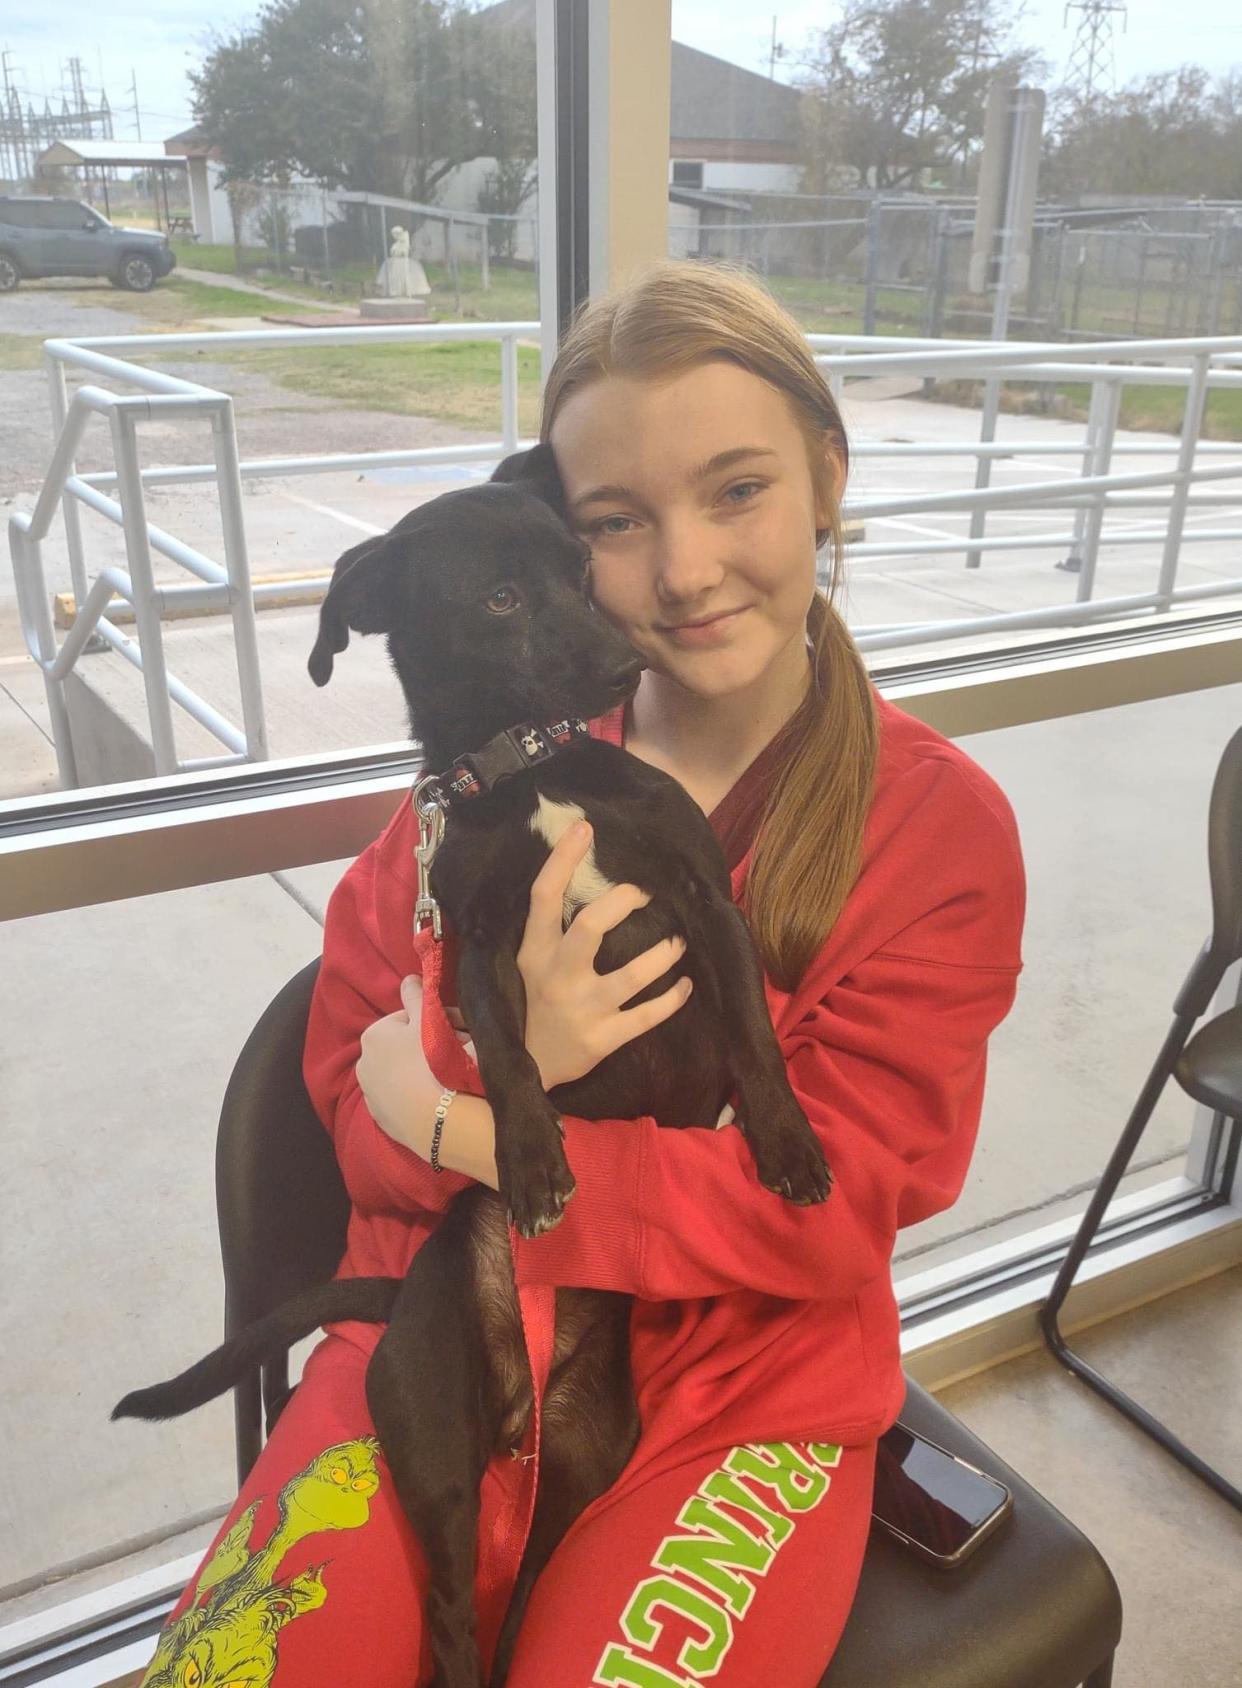 Taryn Brooks with Eddie the dachshund mix. She gave up some of her Christmas gifts to adopt Eddie after seeing a post about him online.